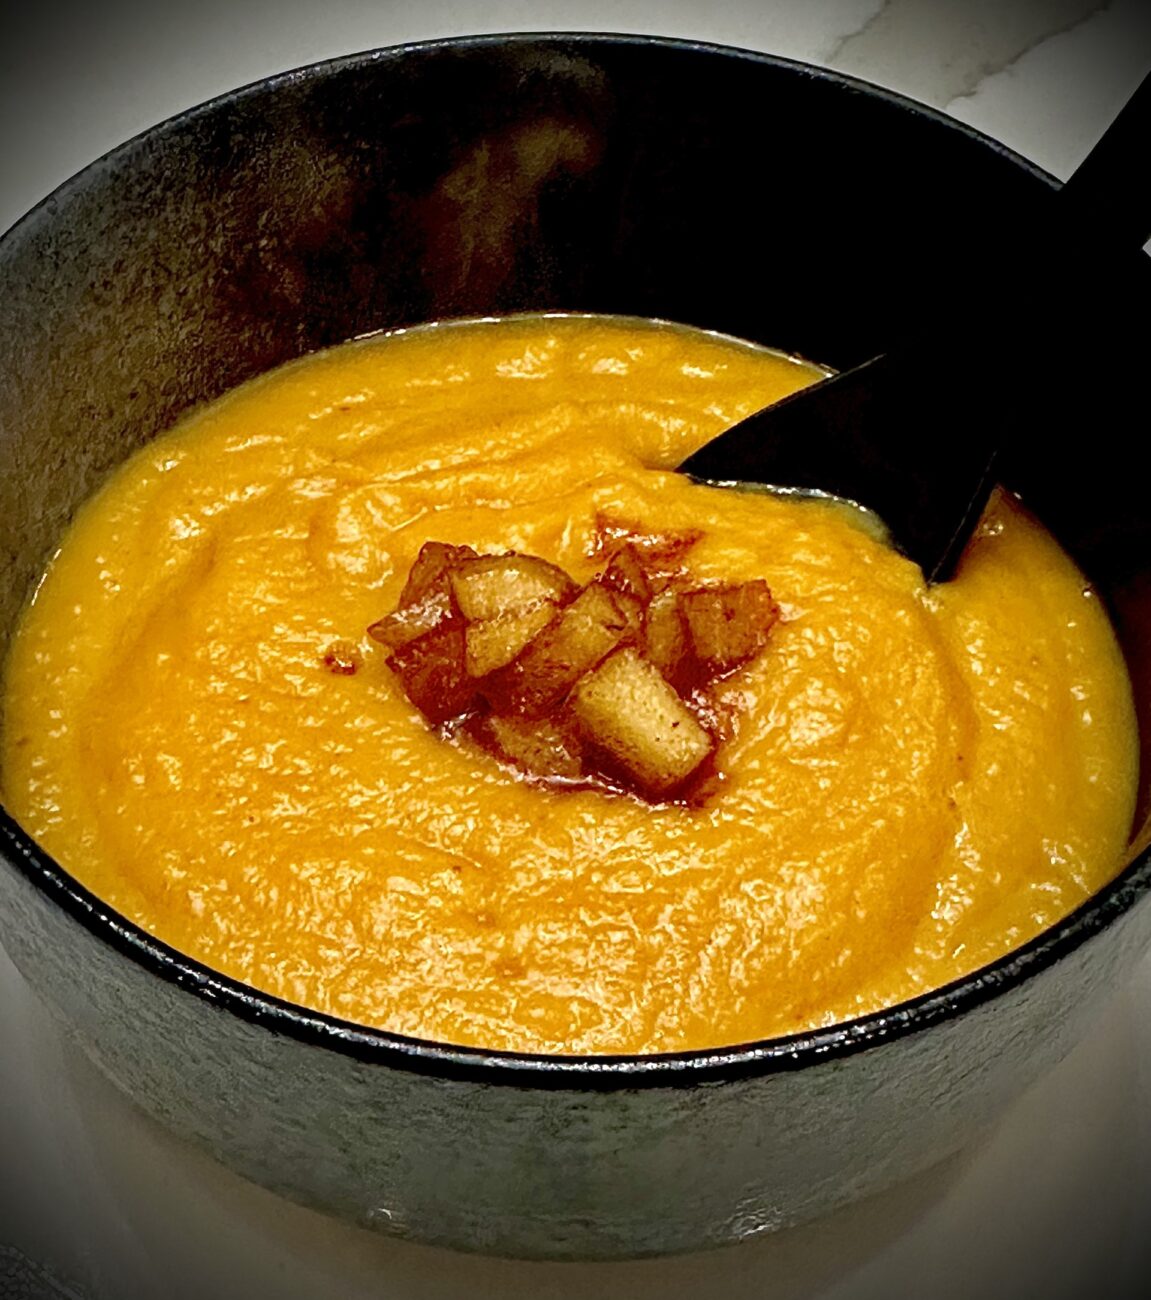 Apple Butternut Squash Soup with Winter Spices and Apple Butternut Compote Topping